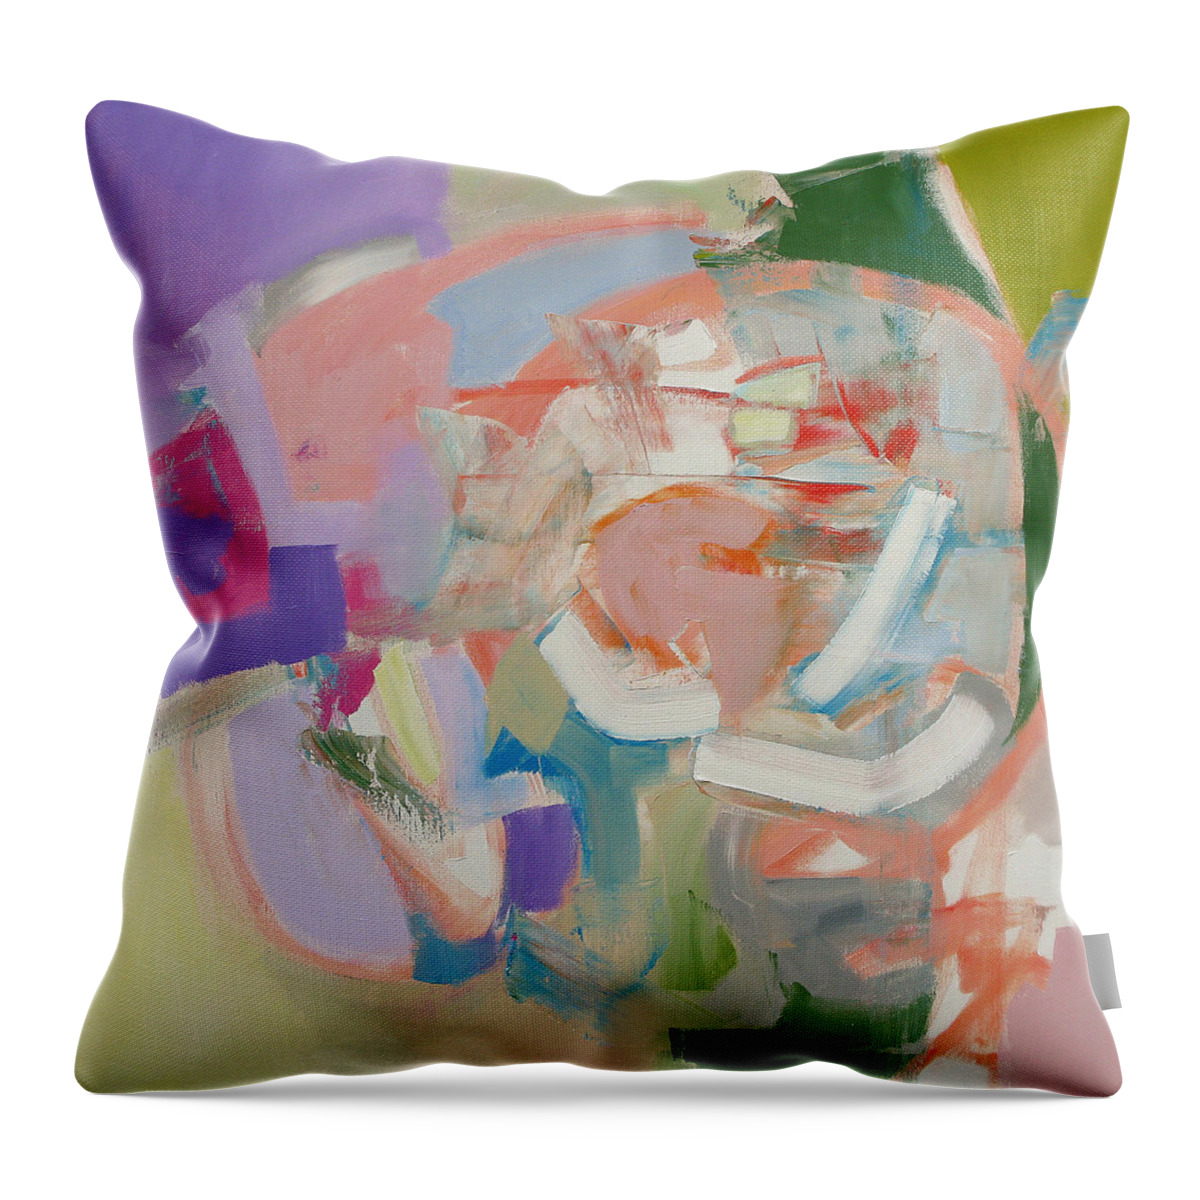 Art Throw Pillow featuring the painting The Big Top by Linda Monfort